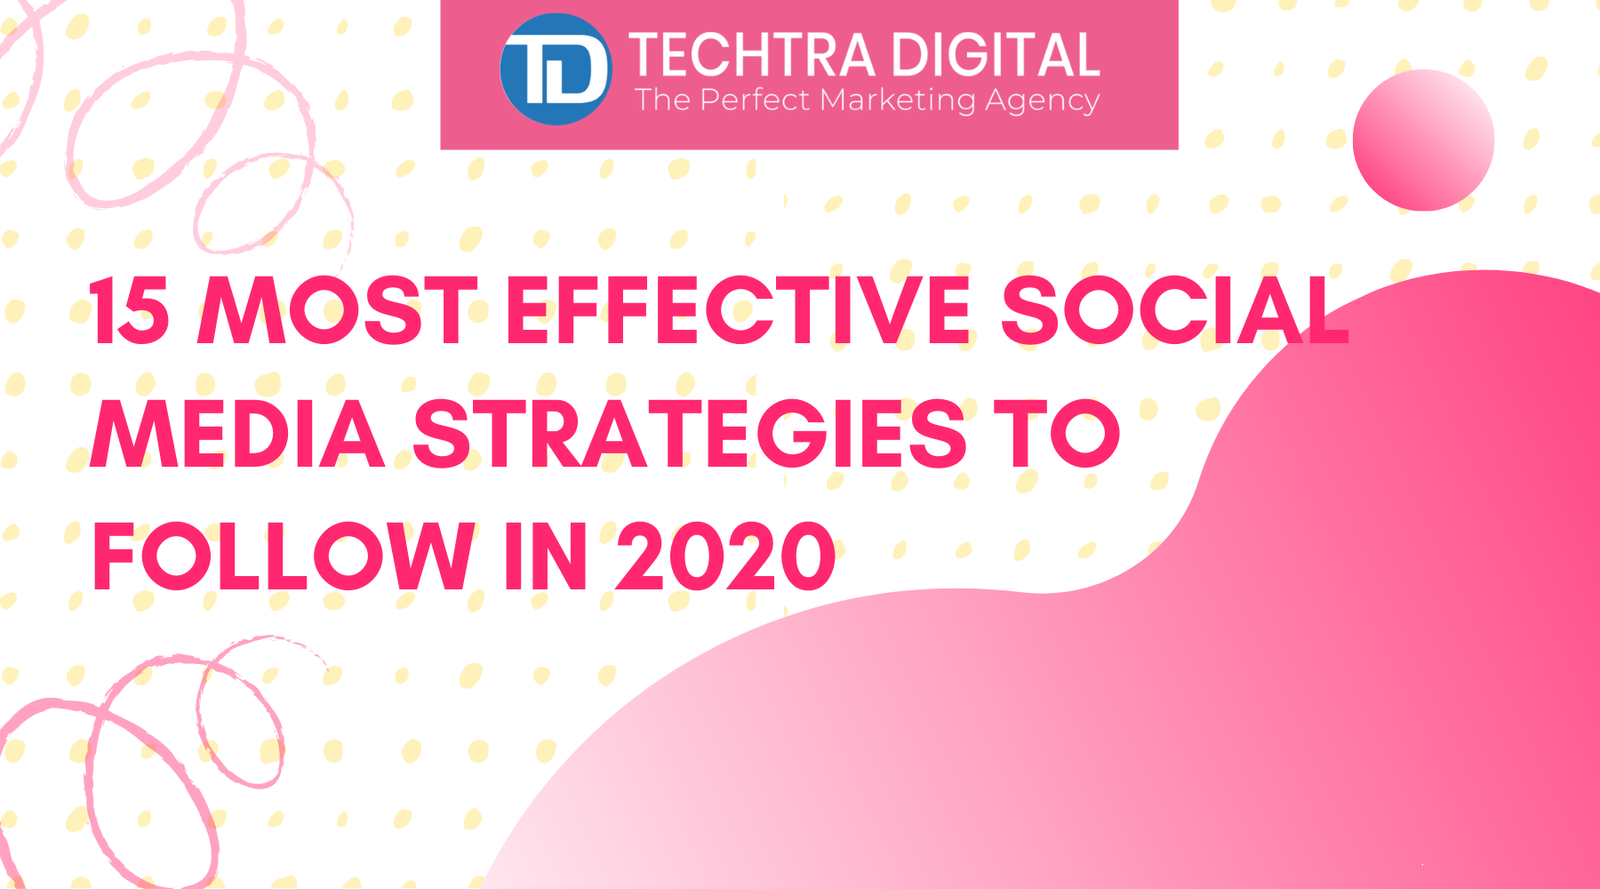 15 MOST EFFECTIVE SOCIAL MEDIA STRATEGIES TO FOLLOW IN 2020